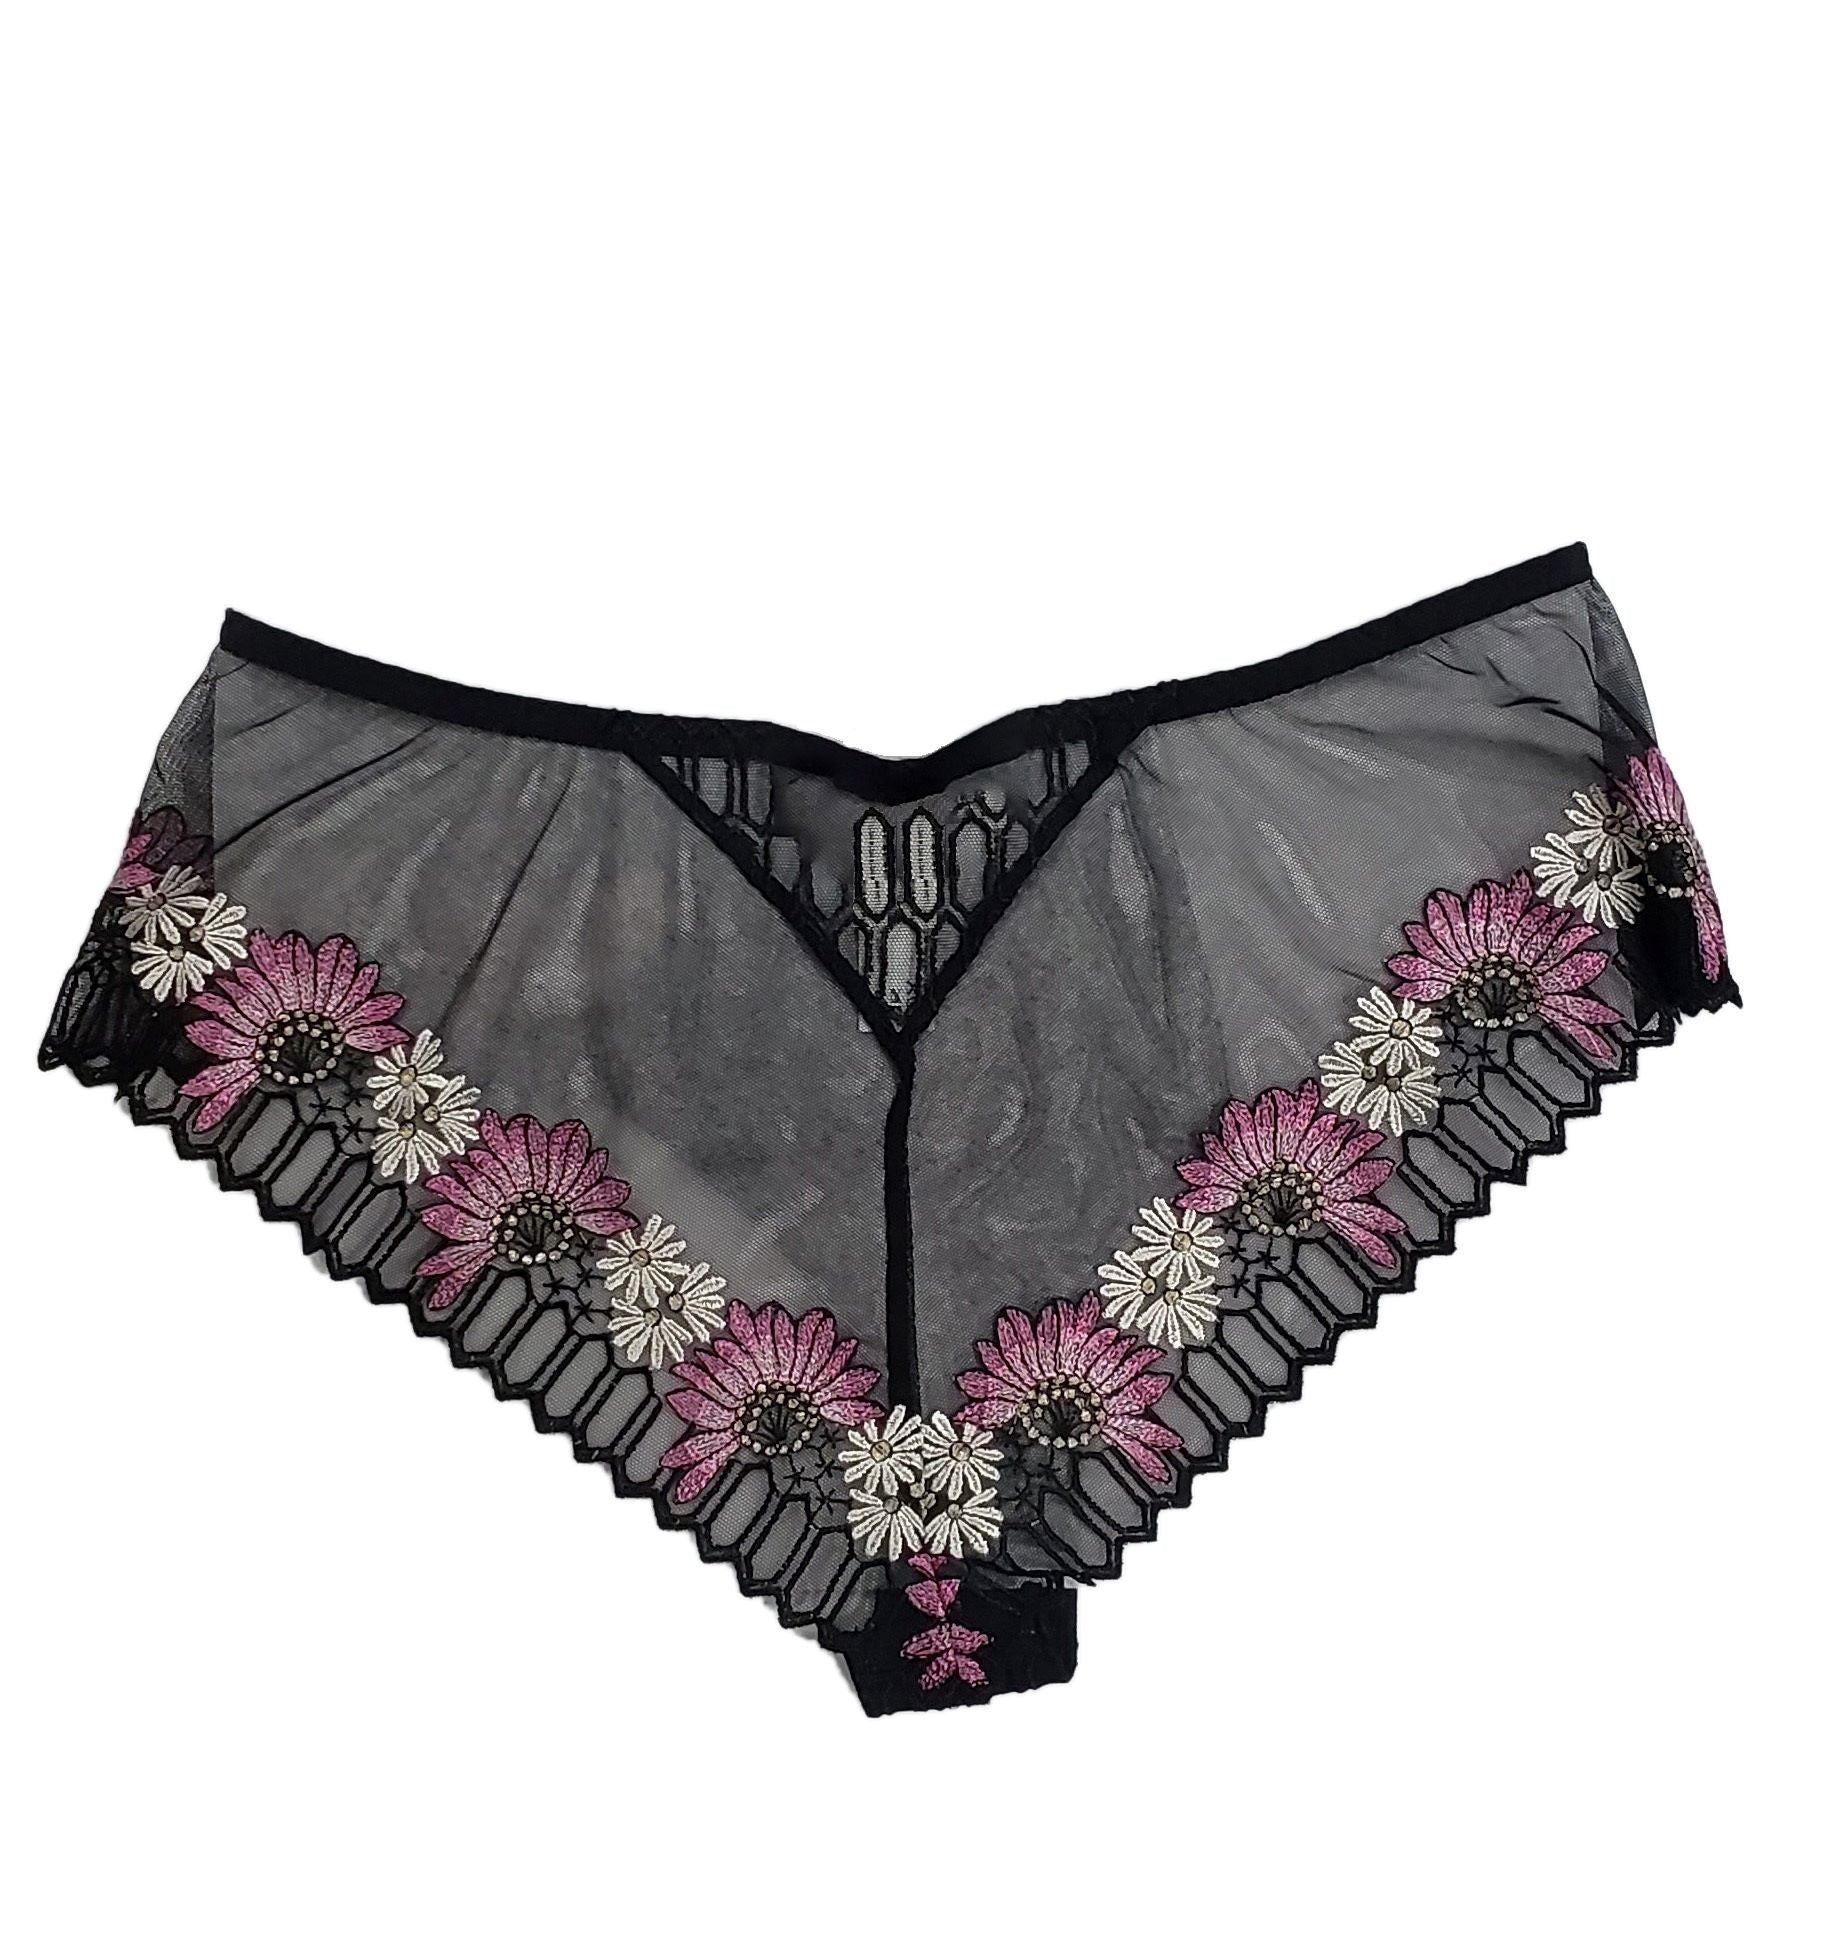 Louisa Bracq shorty from the Flower Power line features luxurious embroidery exclusively at Di Moda Lingerie Toronto.